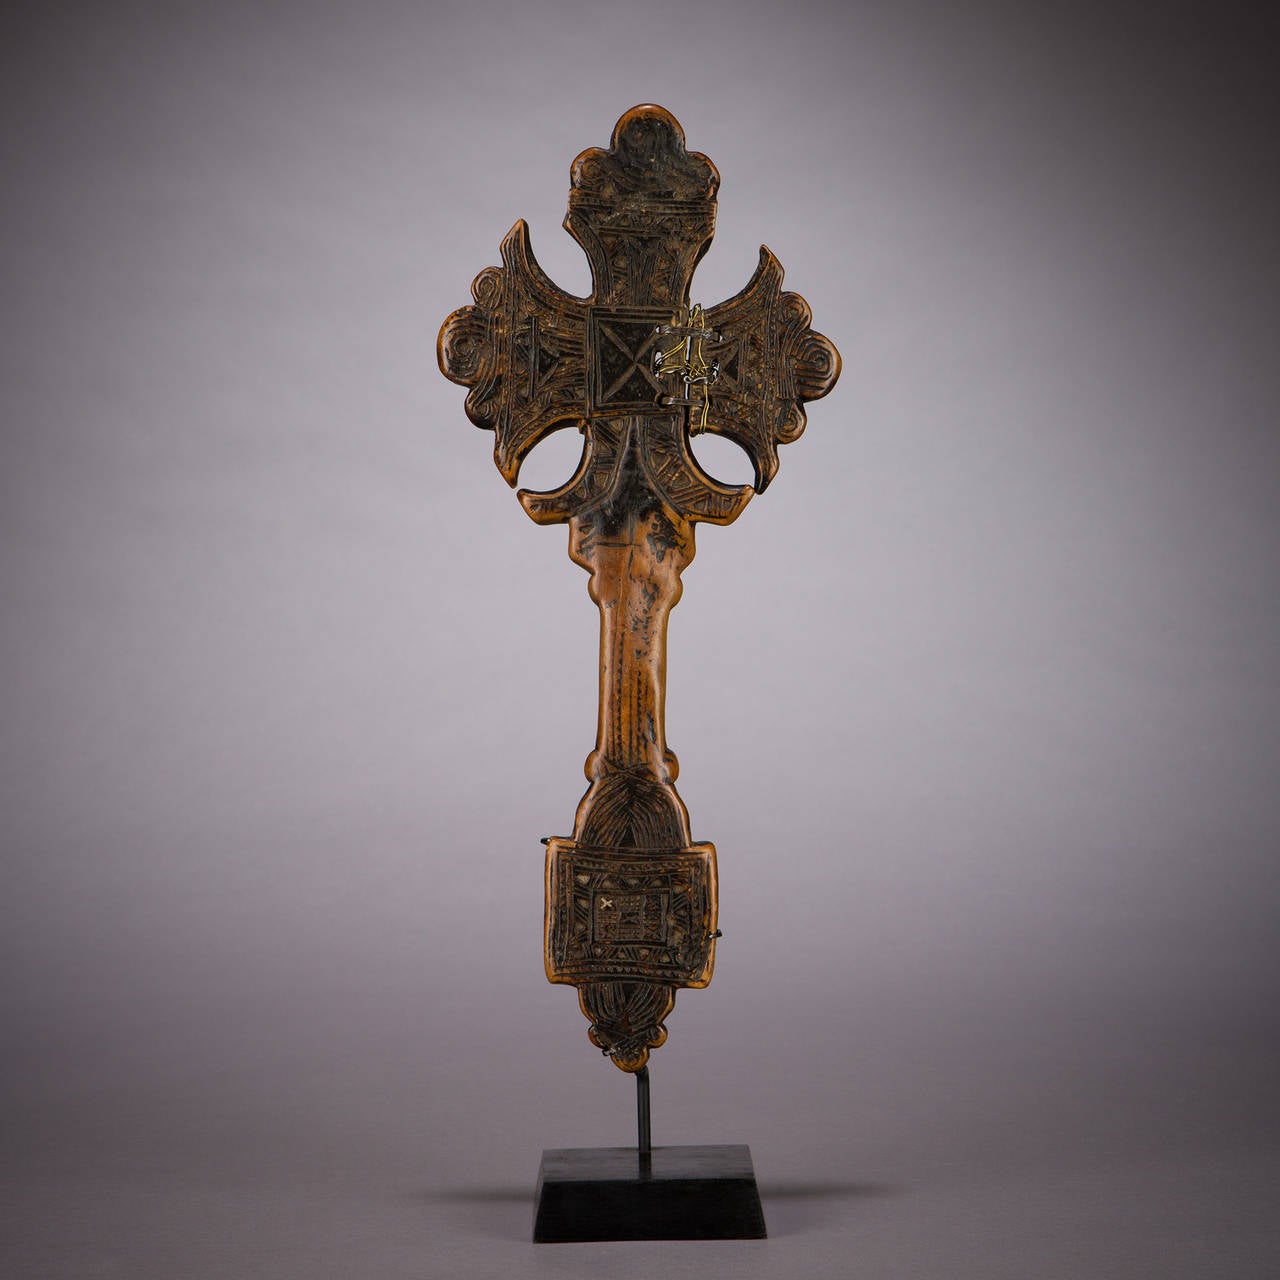 ‘Horn of Lamb of God’ wooden hand cross, circa 17 century, Northern Ethiopia

Ethiopian hand crosses are coveted by collectors of medieval art, religious art and tribal art for their beauty and variety of forms.

Ethiopia was probably the second